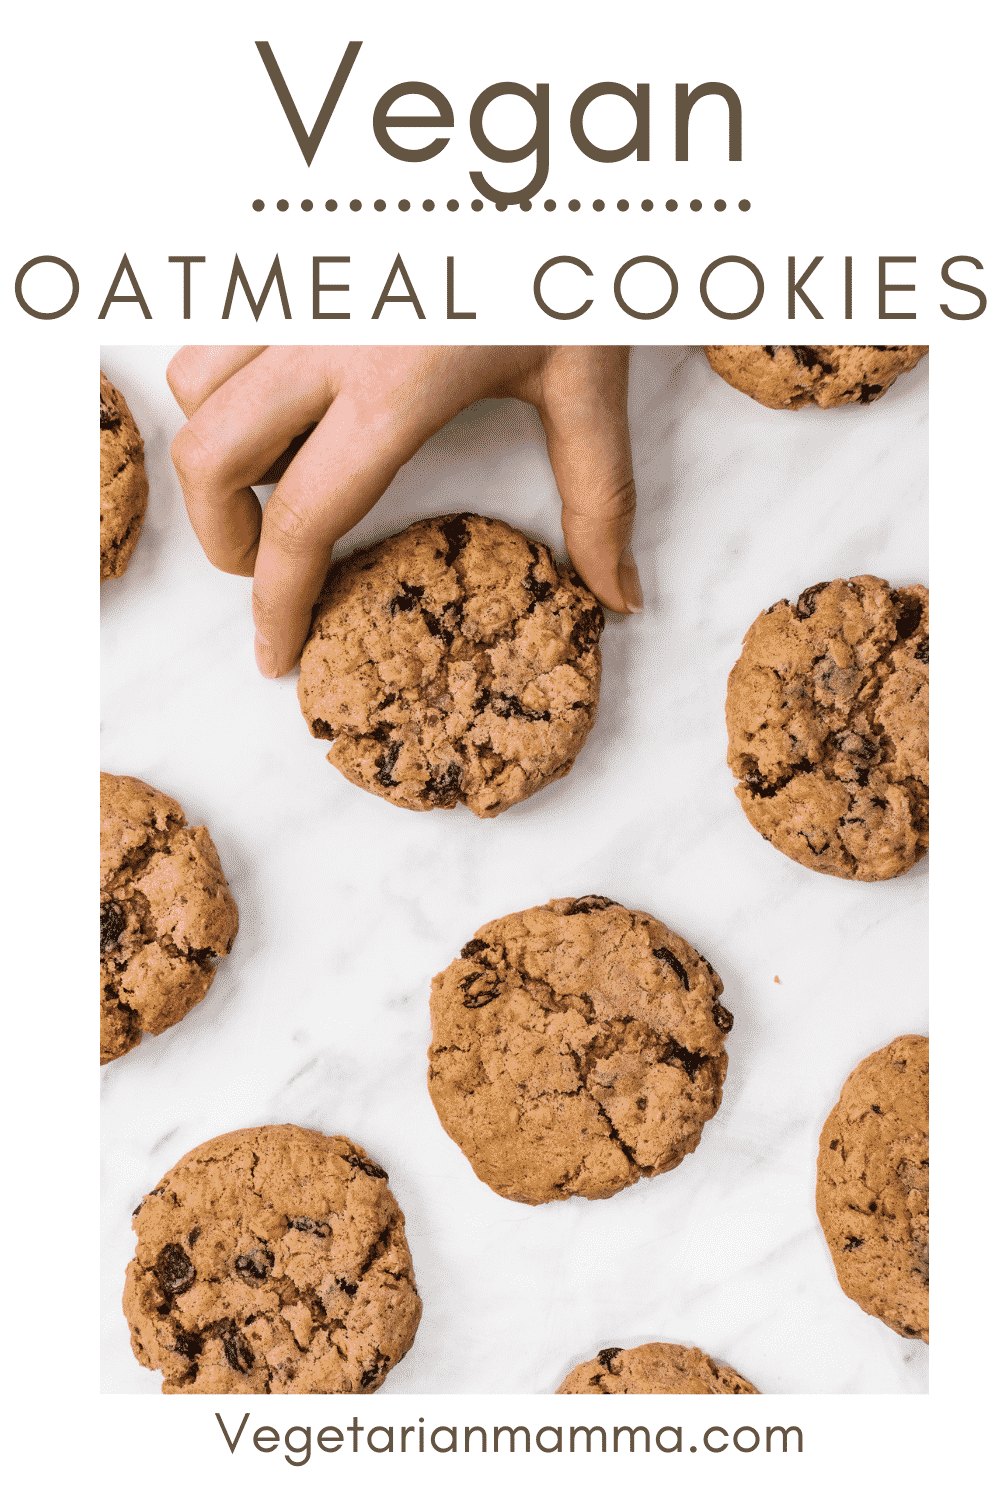 These Vegan Oatmeal Cookies are totally gluten free and a great Celiac snack! They're super easy to whip together with gluten-free rolled oats, yummy raisins, and a pinch of cinnamon.